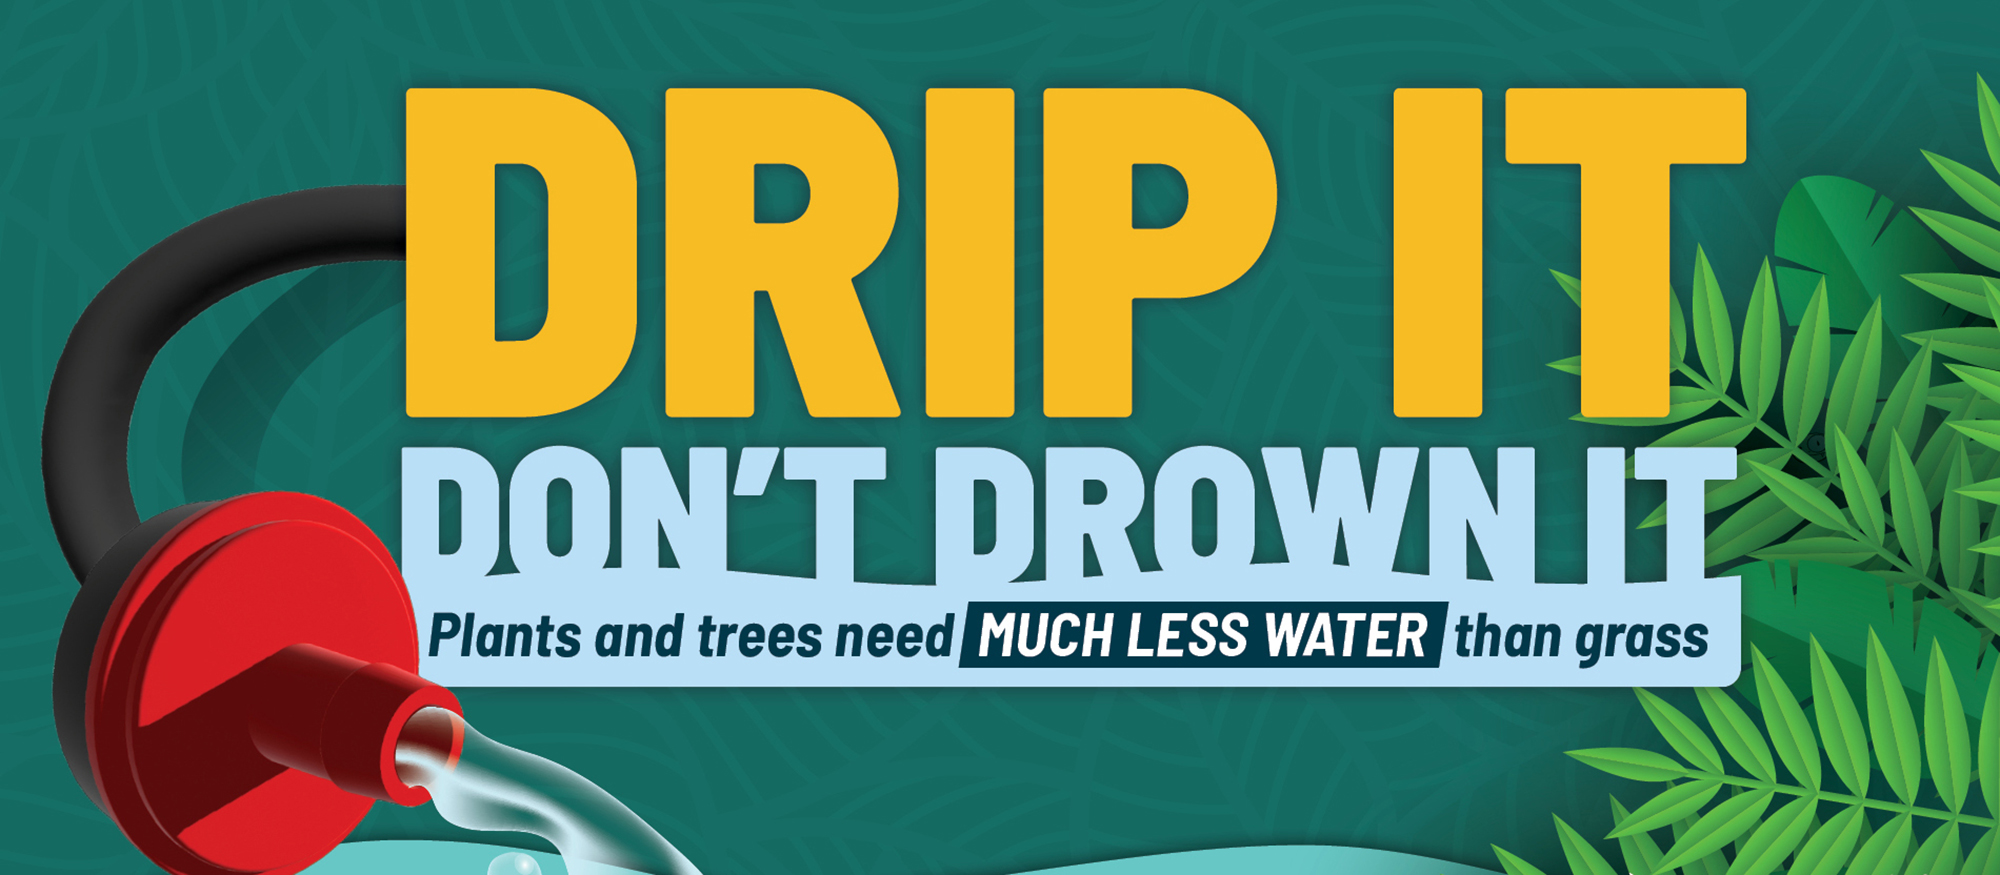 Illustration of drip head says "drip it, don't drown it - plants and trees need MUCH LESS WATER than grass"